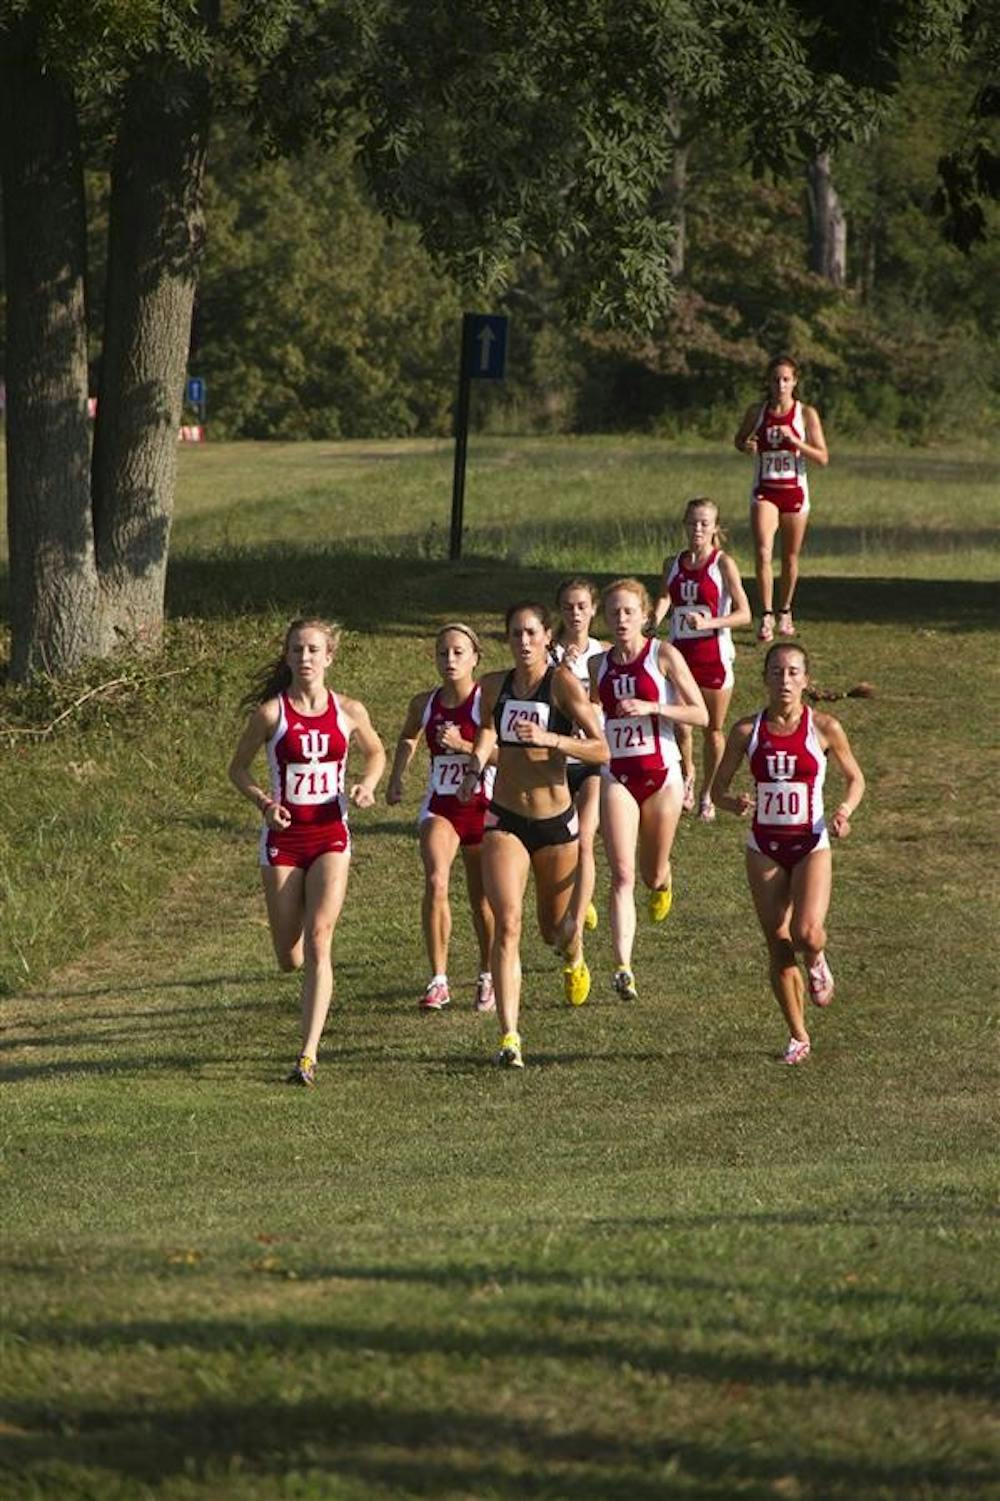 The front pack of the women's race runs toward the 4-kilometer marker in the 5-kilometer race during the IU Open on Saturday morning at IU Cross Country Course.